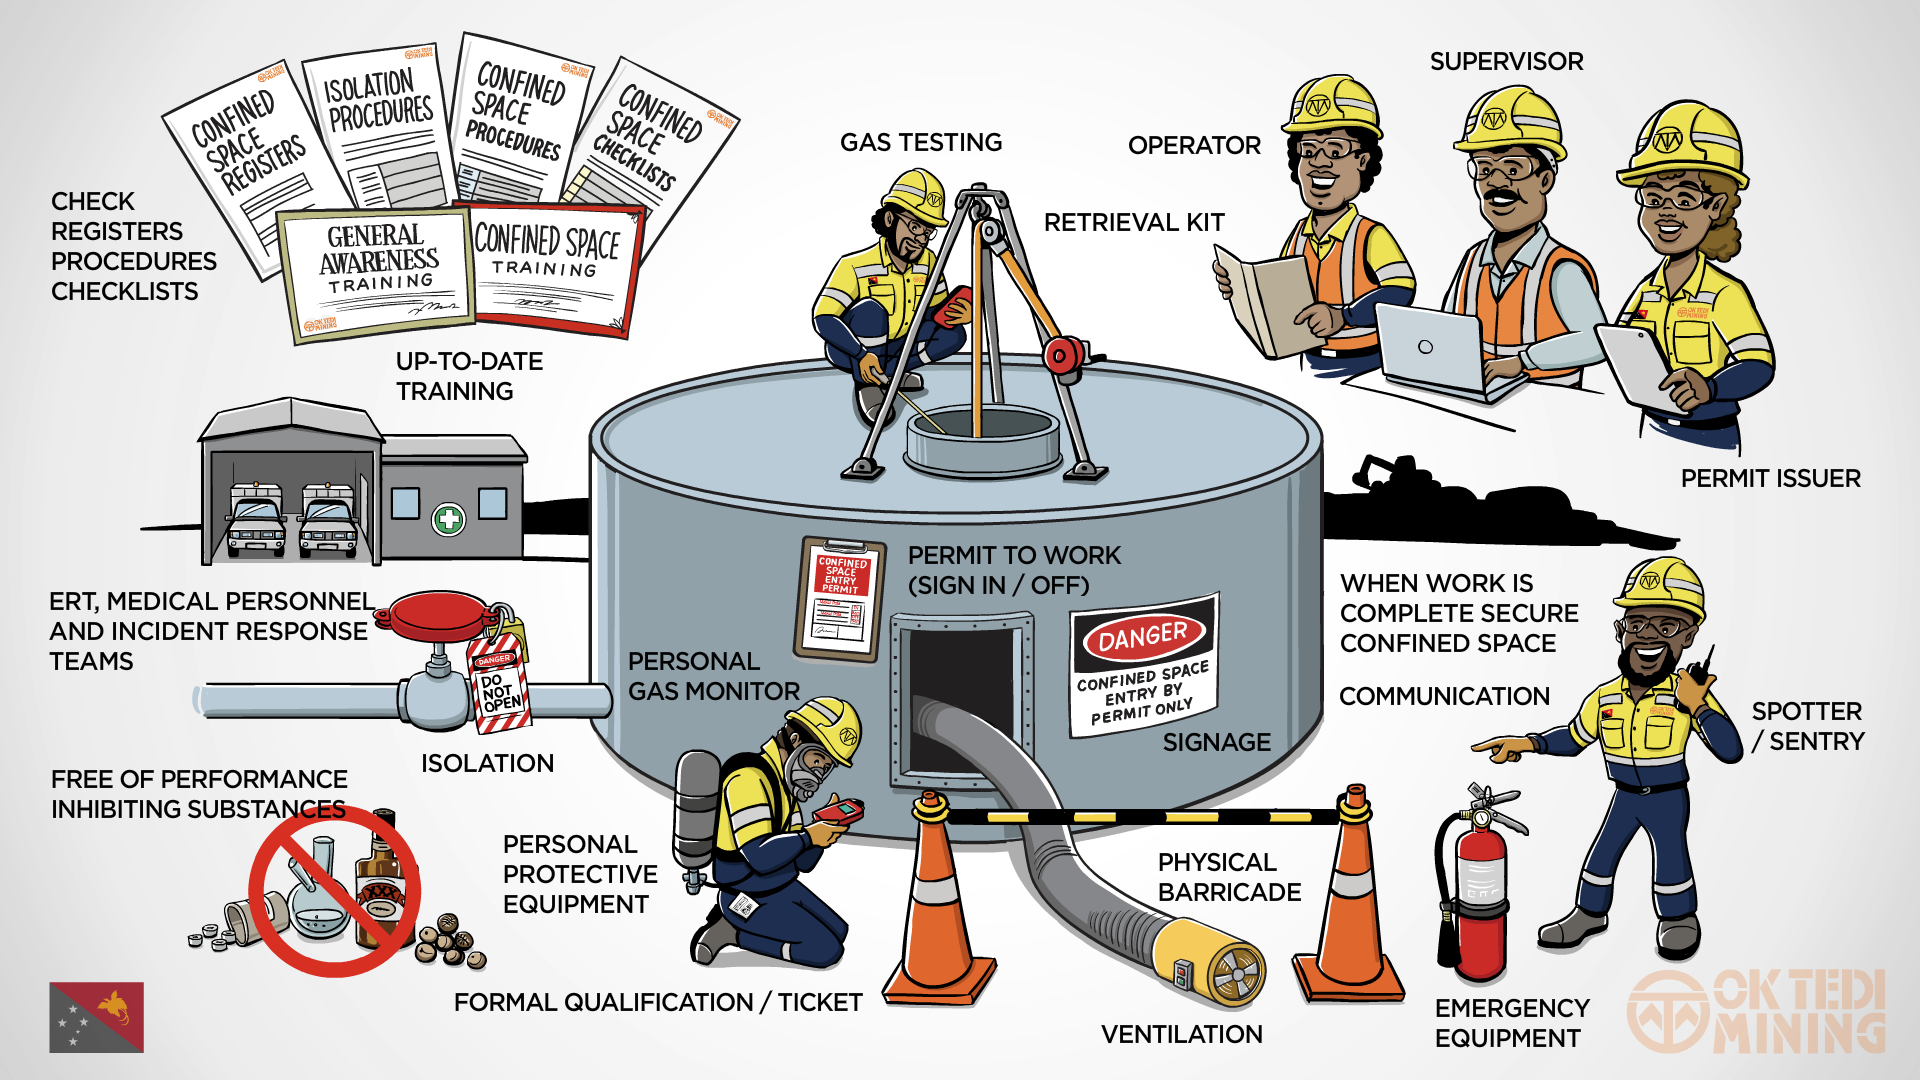 Confined Space Business Partner Safety Web Portal